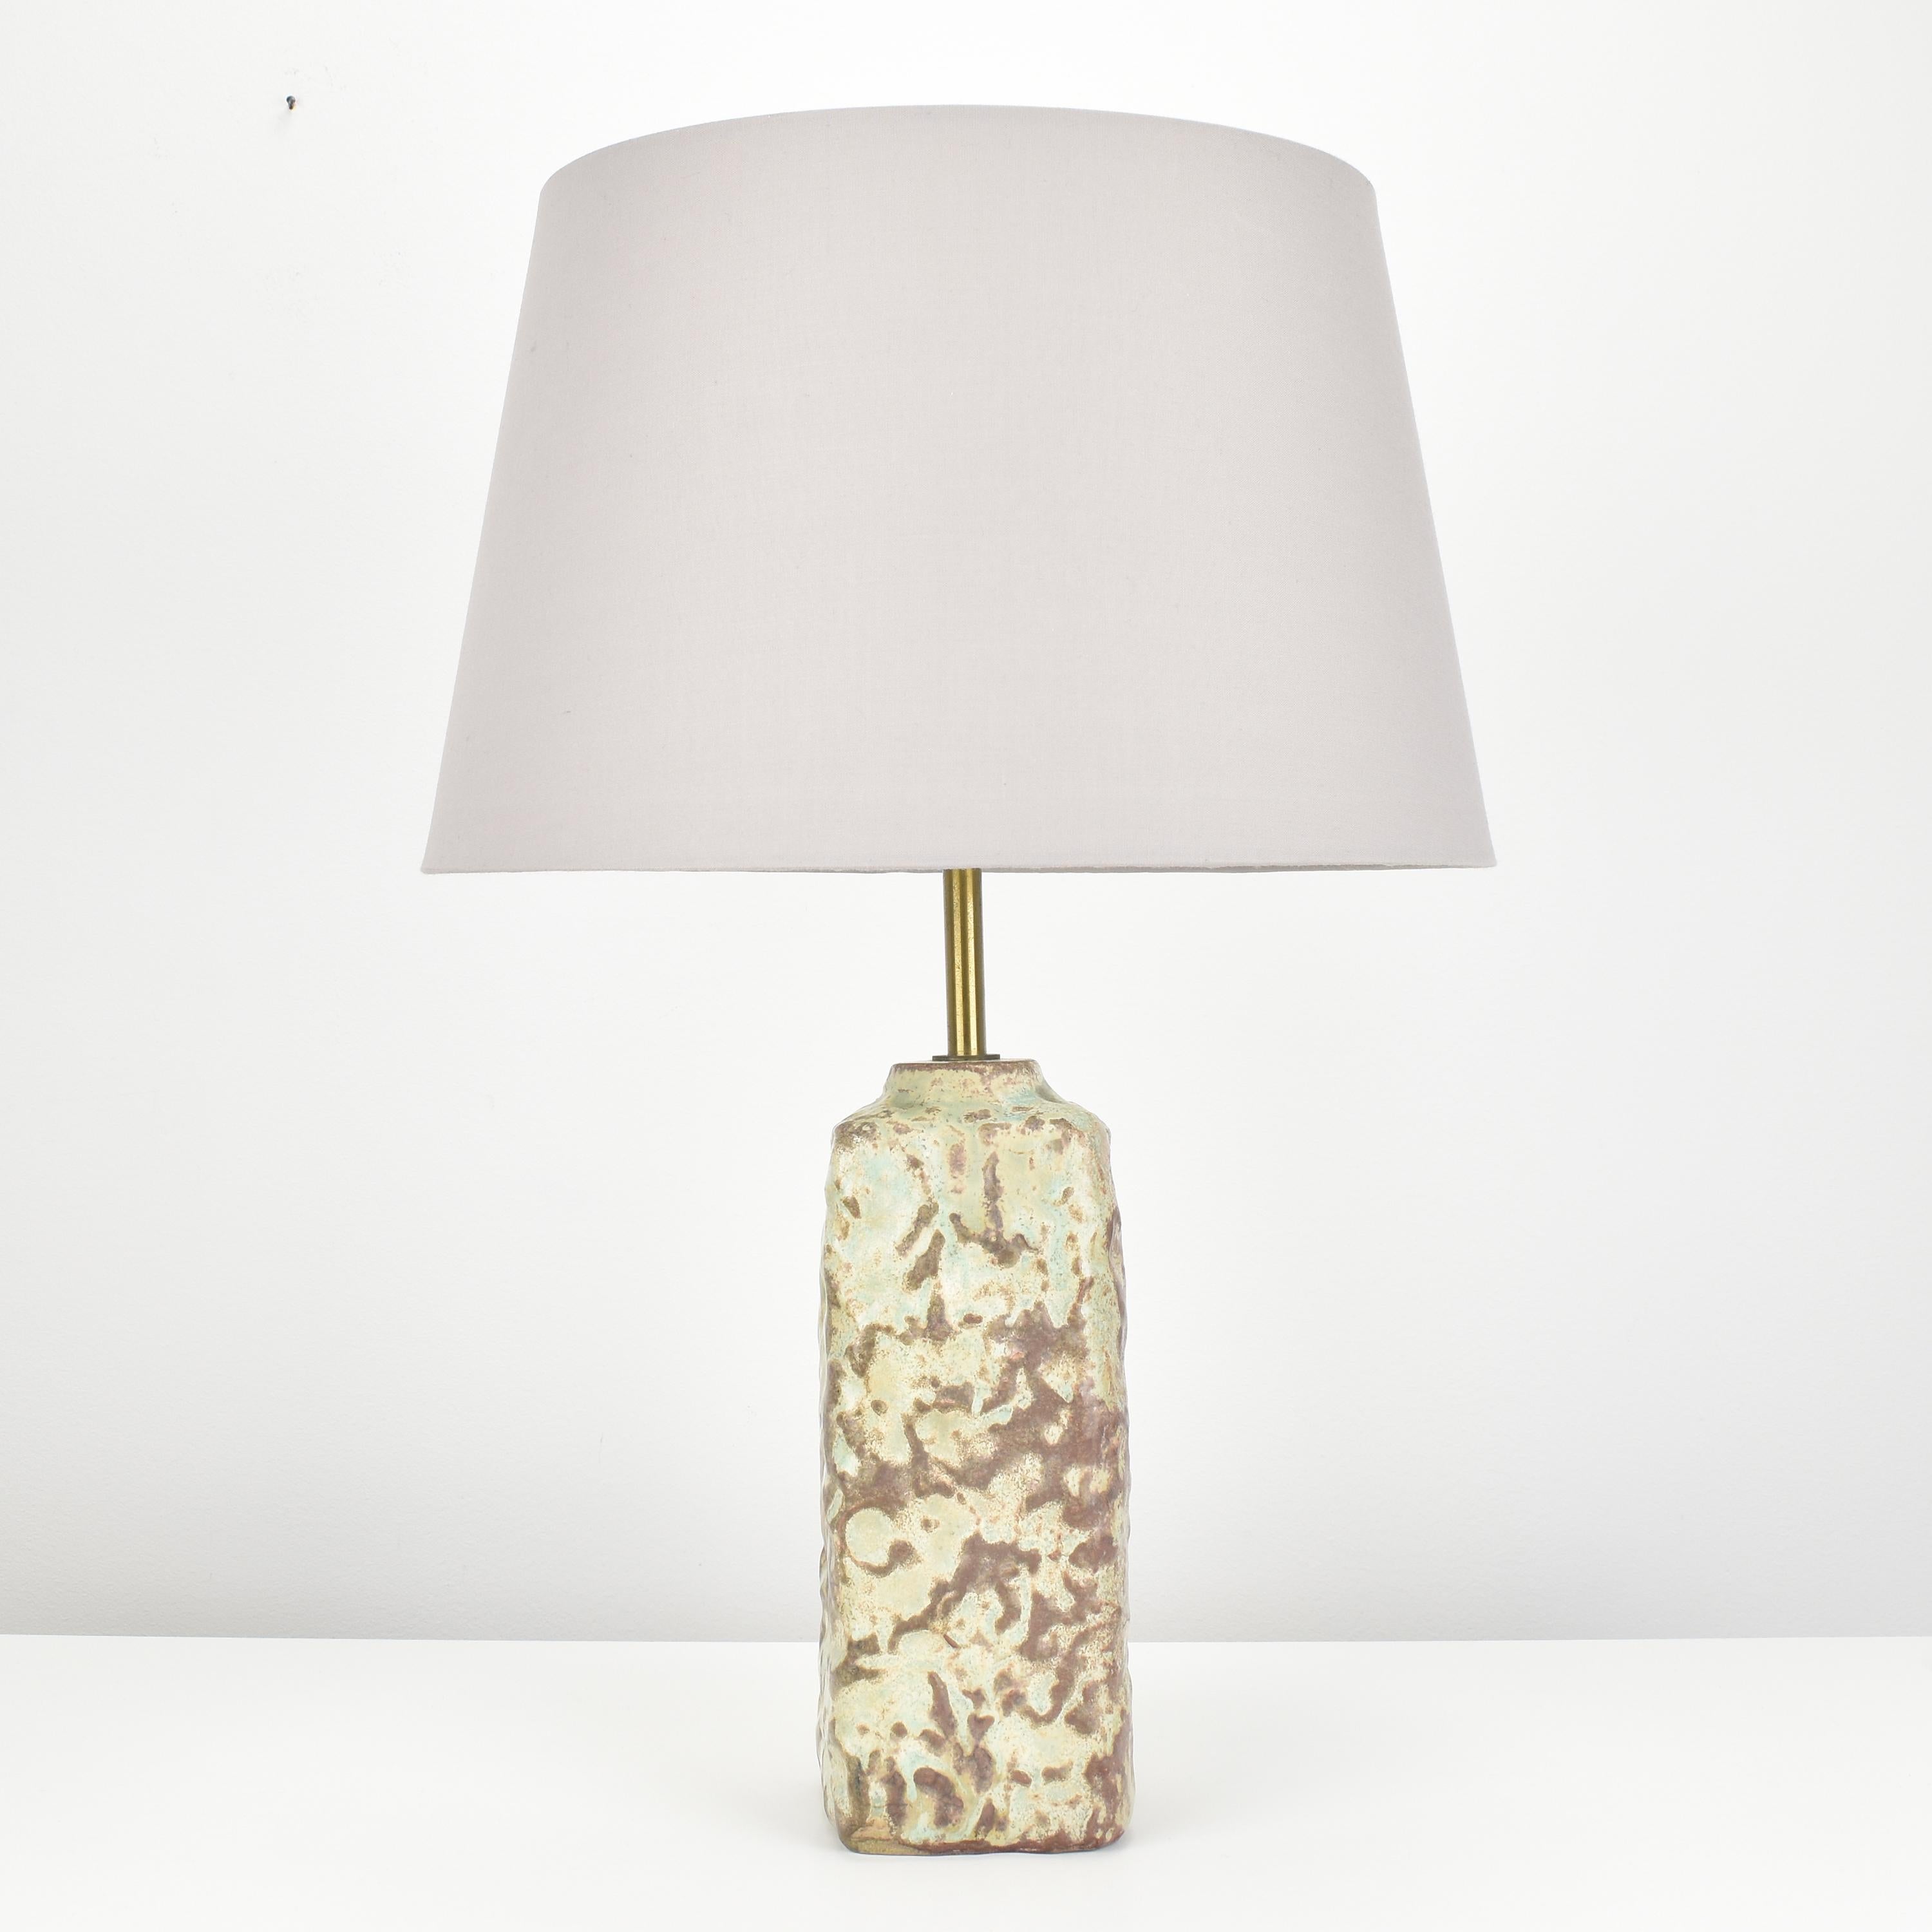 This Mobach ceramic table lamp is a vintage piece of studio pottery that features a textured surface, reminiscent of the Axel Salto style. 

The lamp's ceramic body measures approximately 9.5cm x 24.5cm x 9.5cm and is in perfect condition. 

The